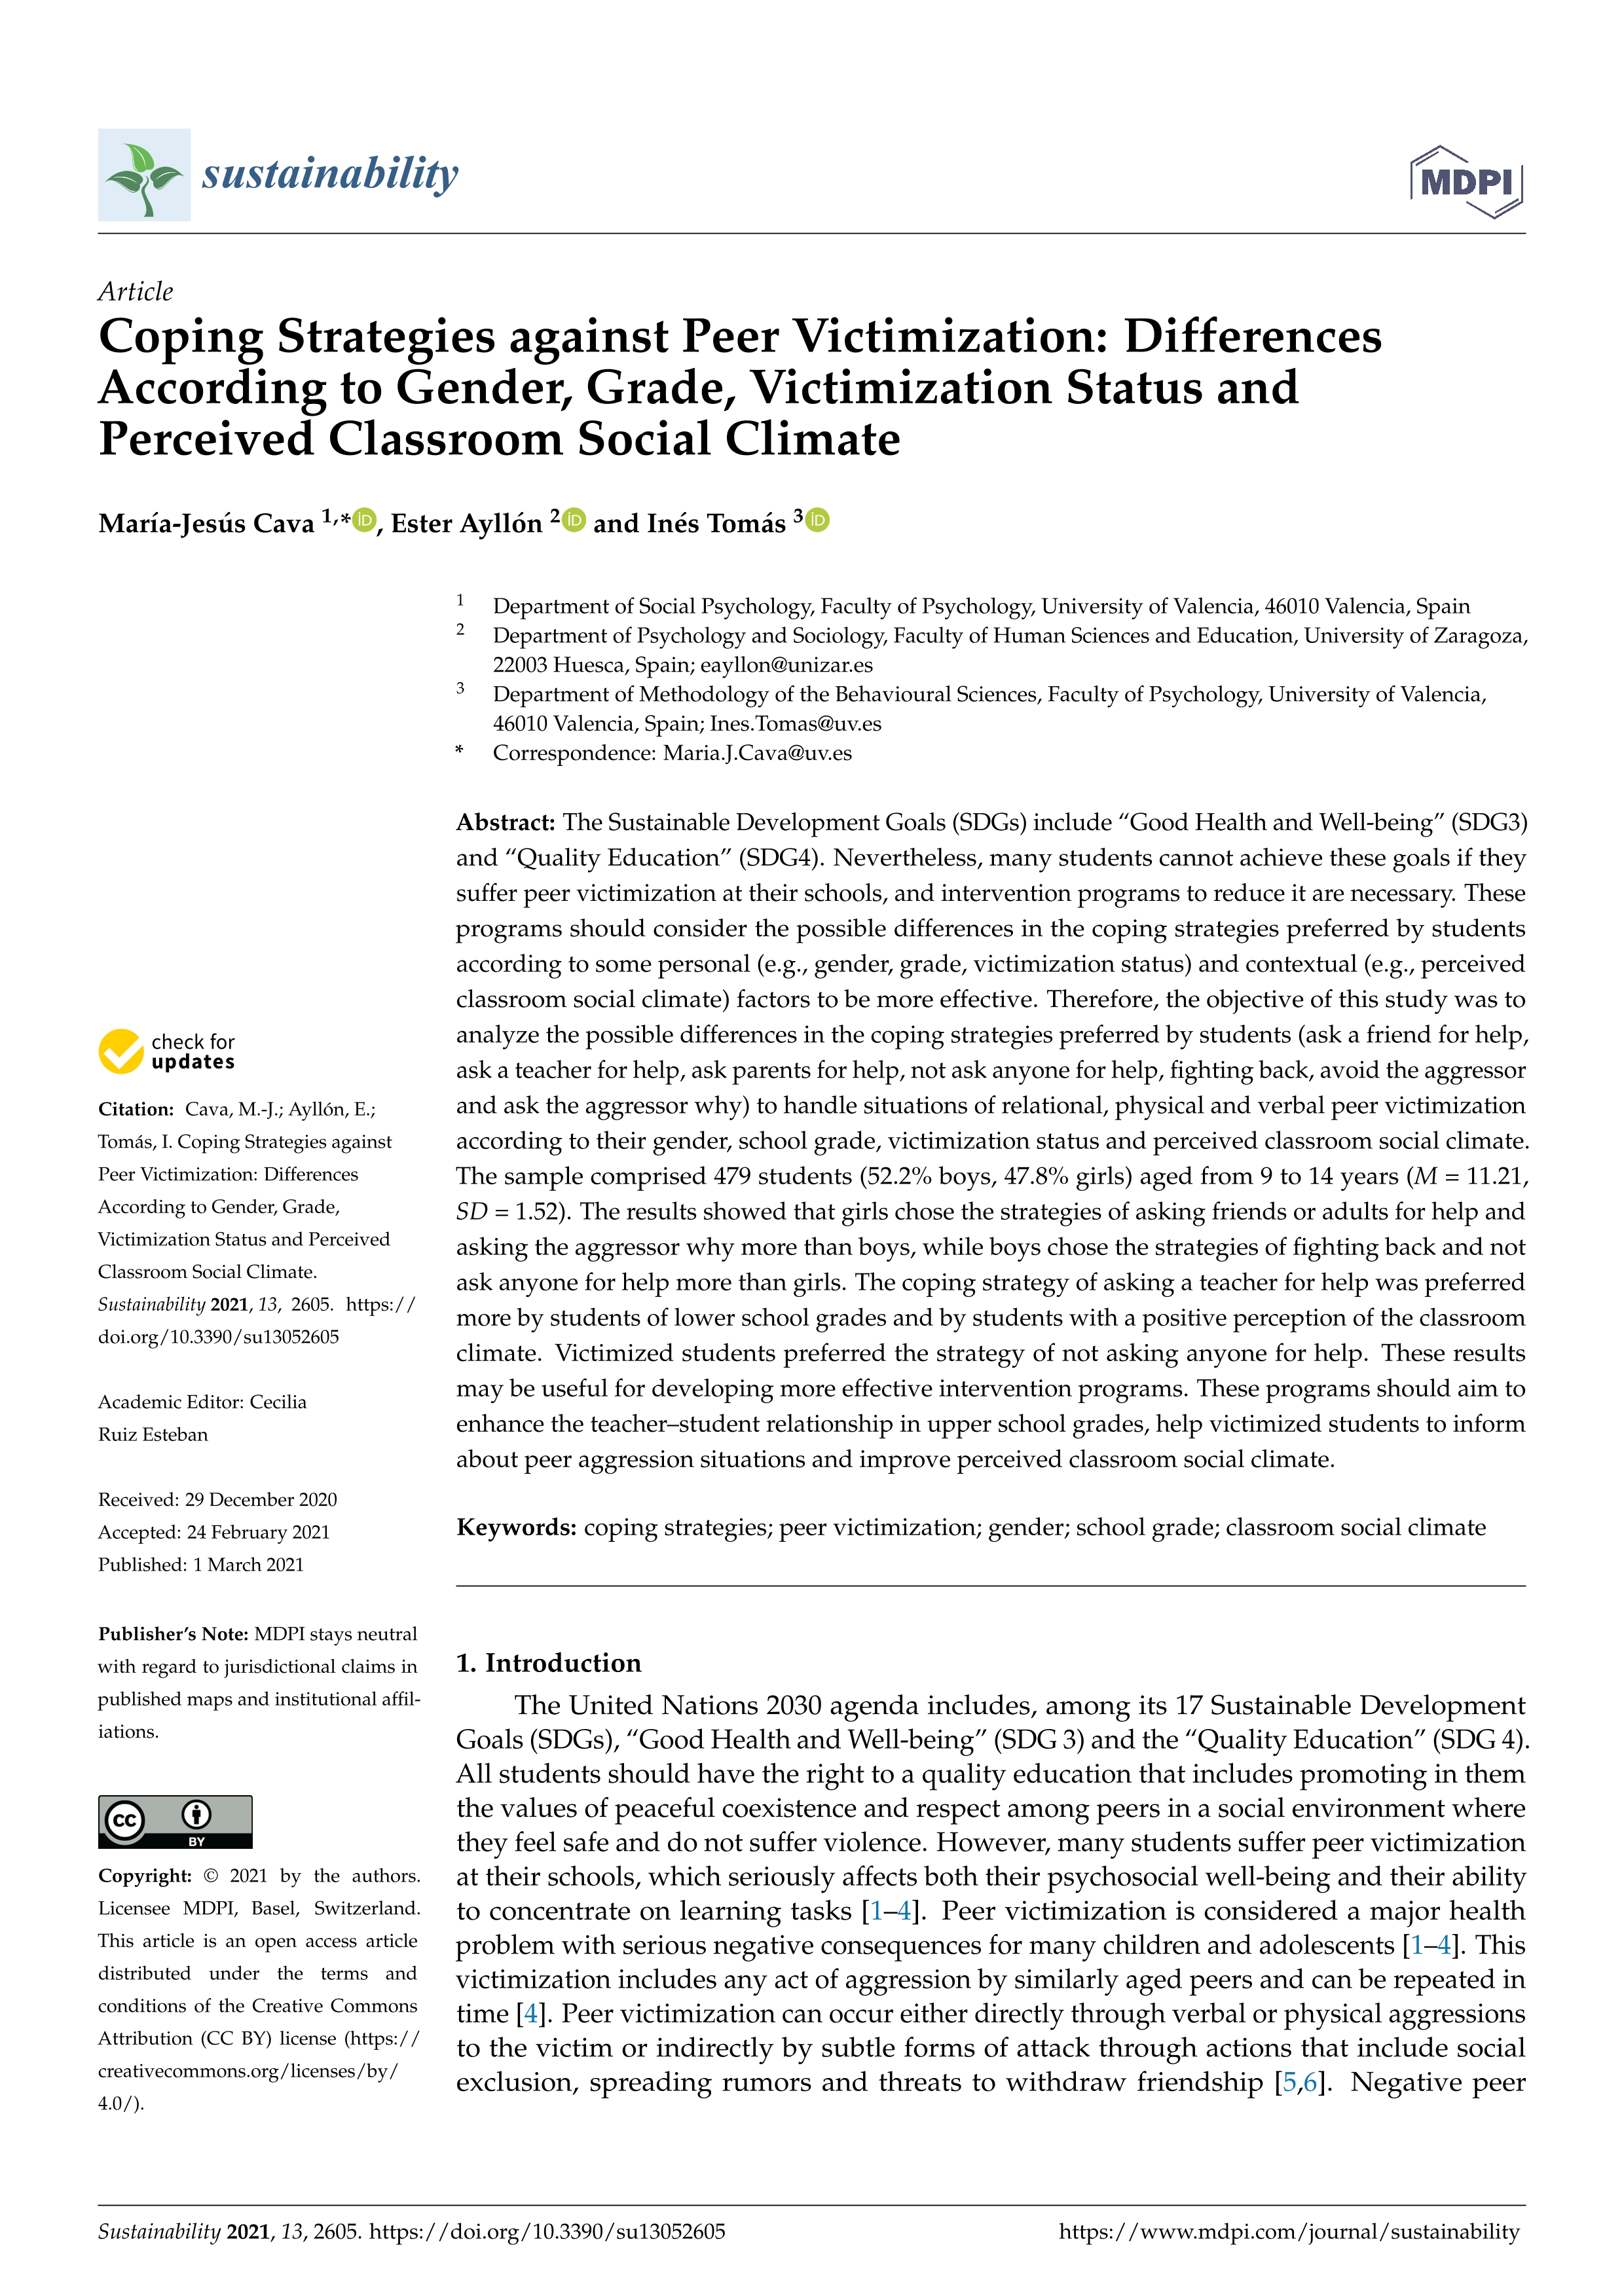 Coping strategies against peer victimization: differences according to gender, grade, victimization status and perceived classroom social climate